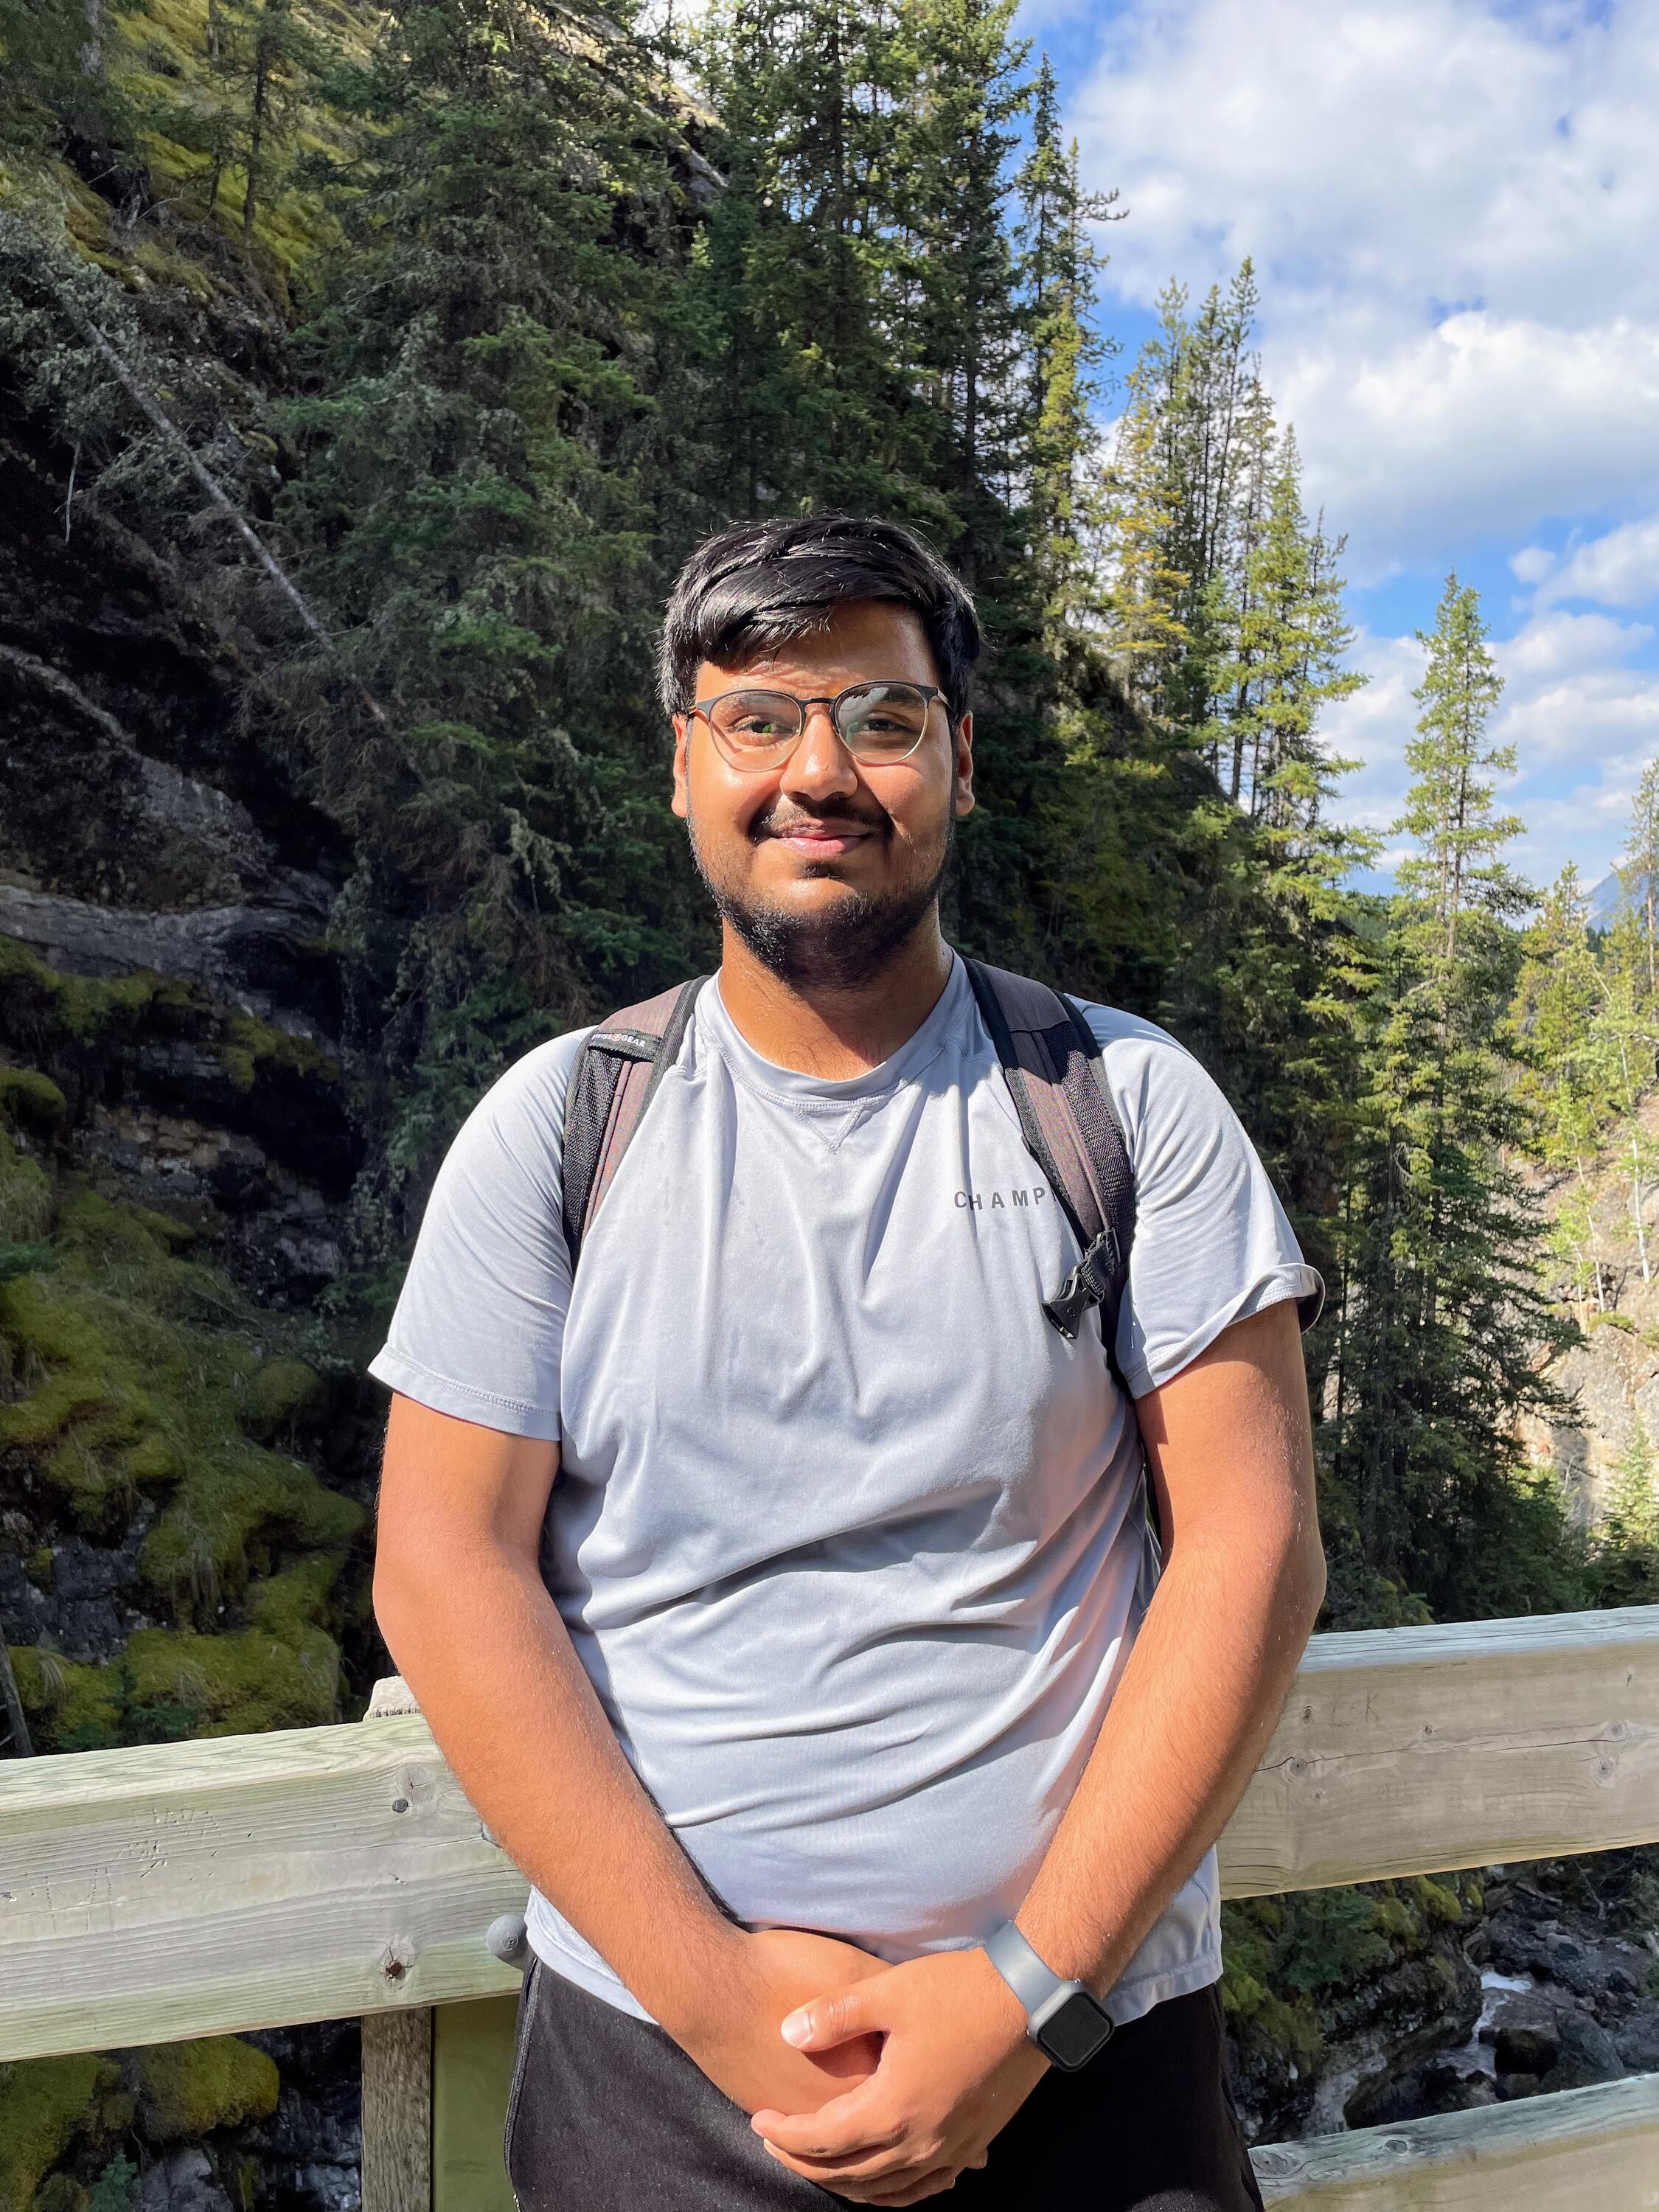 Shashwat smiling in a forest and leaning against a wooden railing. 